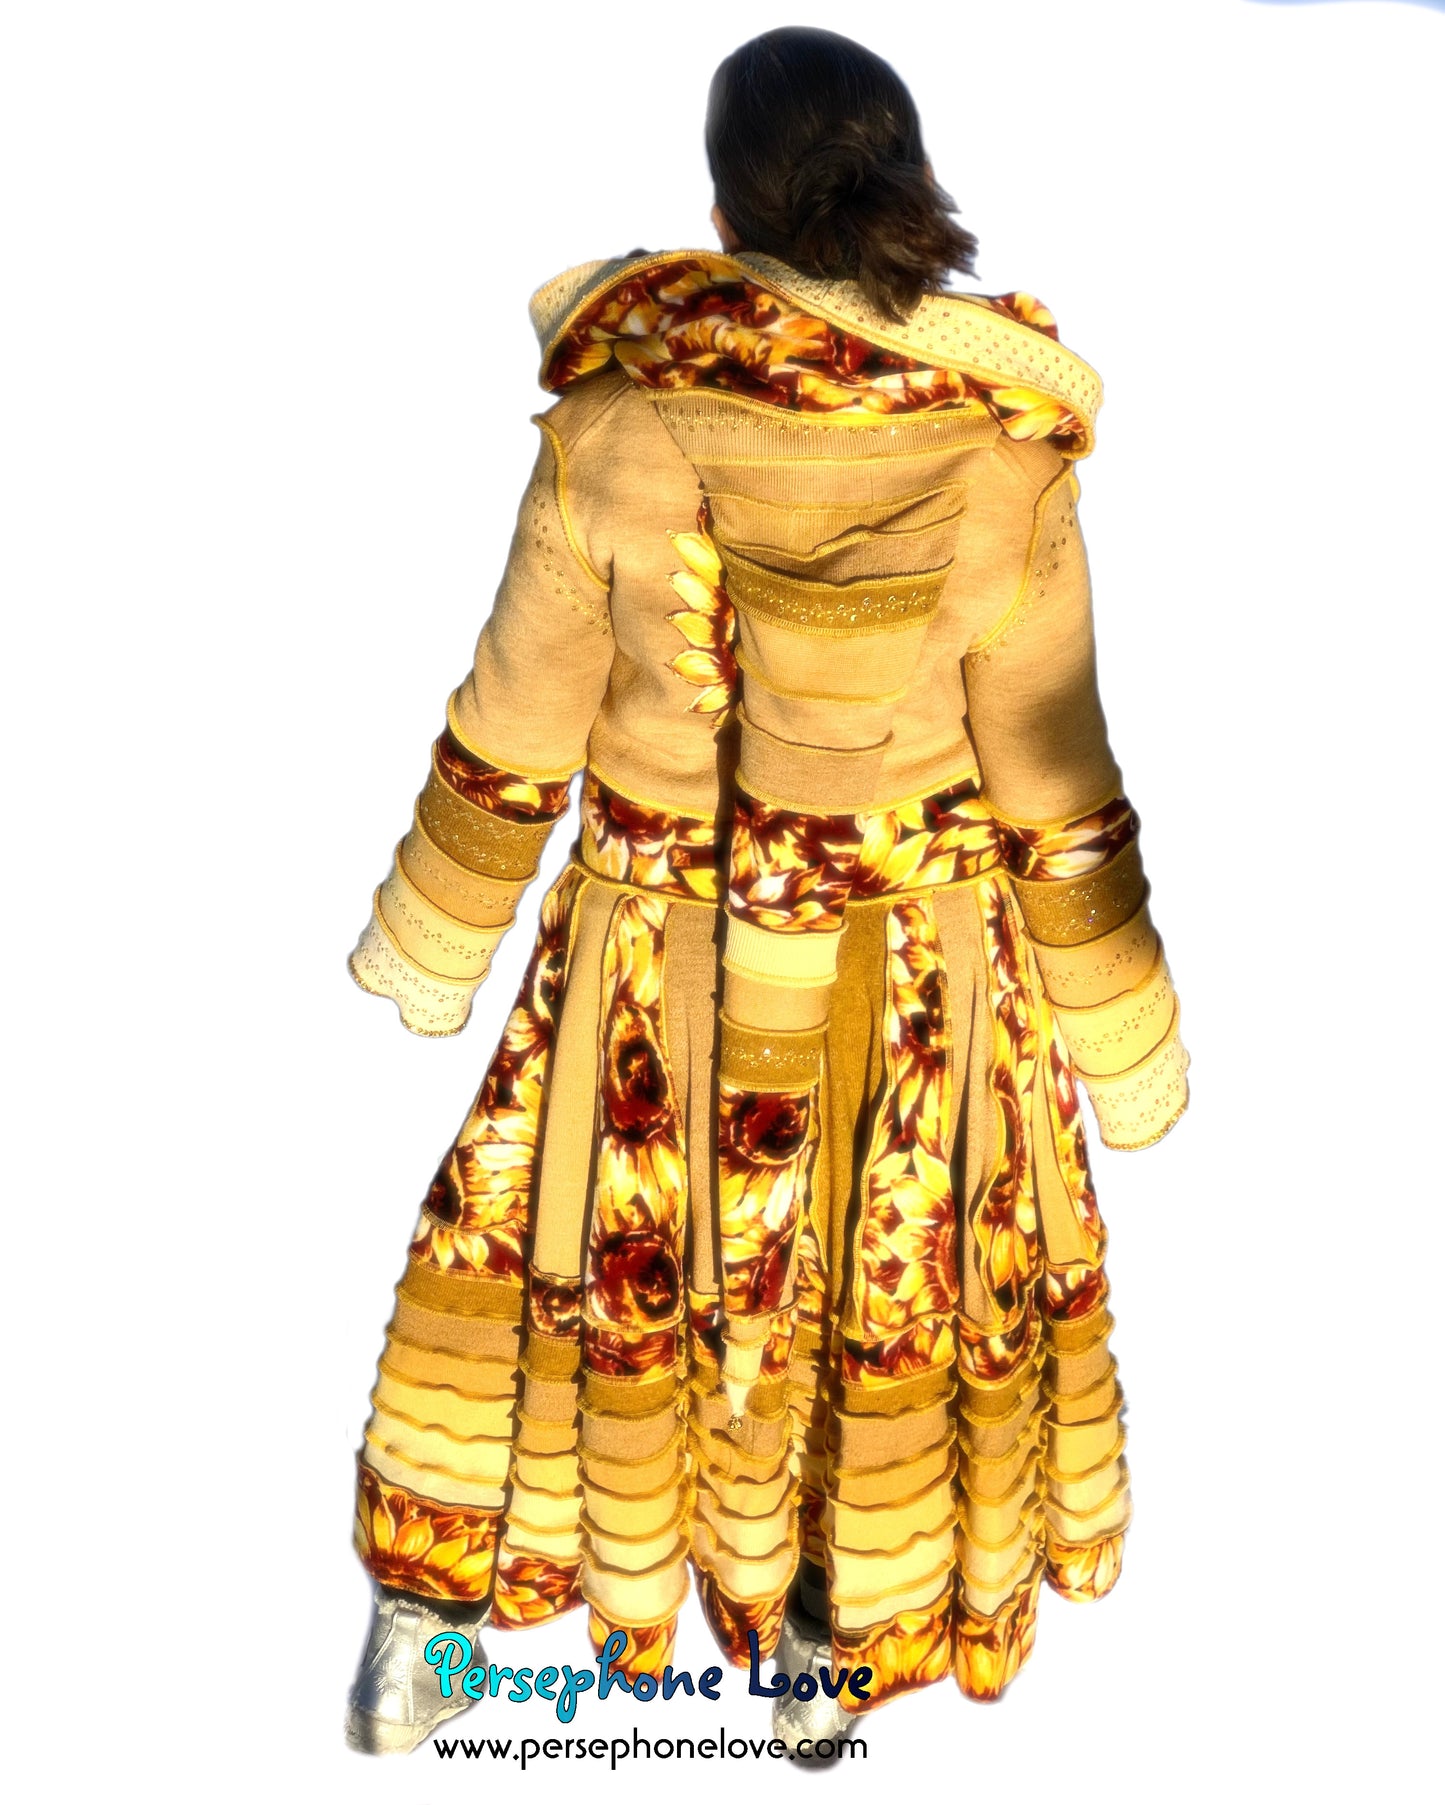 "Sunshine Cameo" Yellow sunflower needle-felted wool/cashmere Katwise-inspired patchwork elf sweatercoat-2517